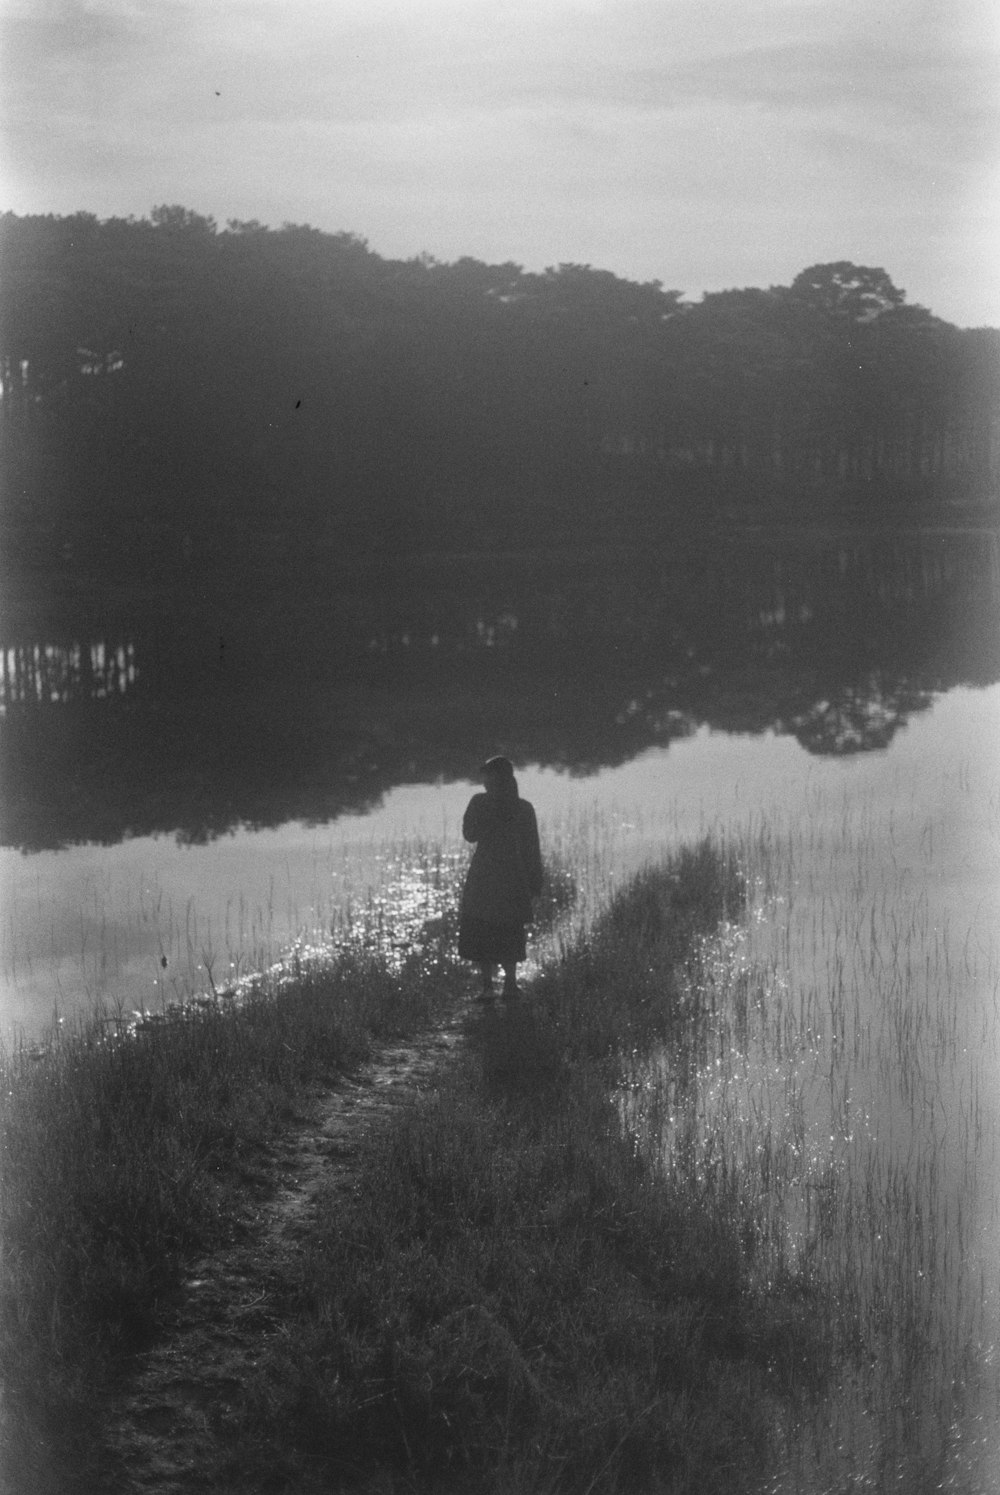 a black and white photo of a person walking on a path near a lake